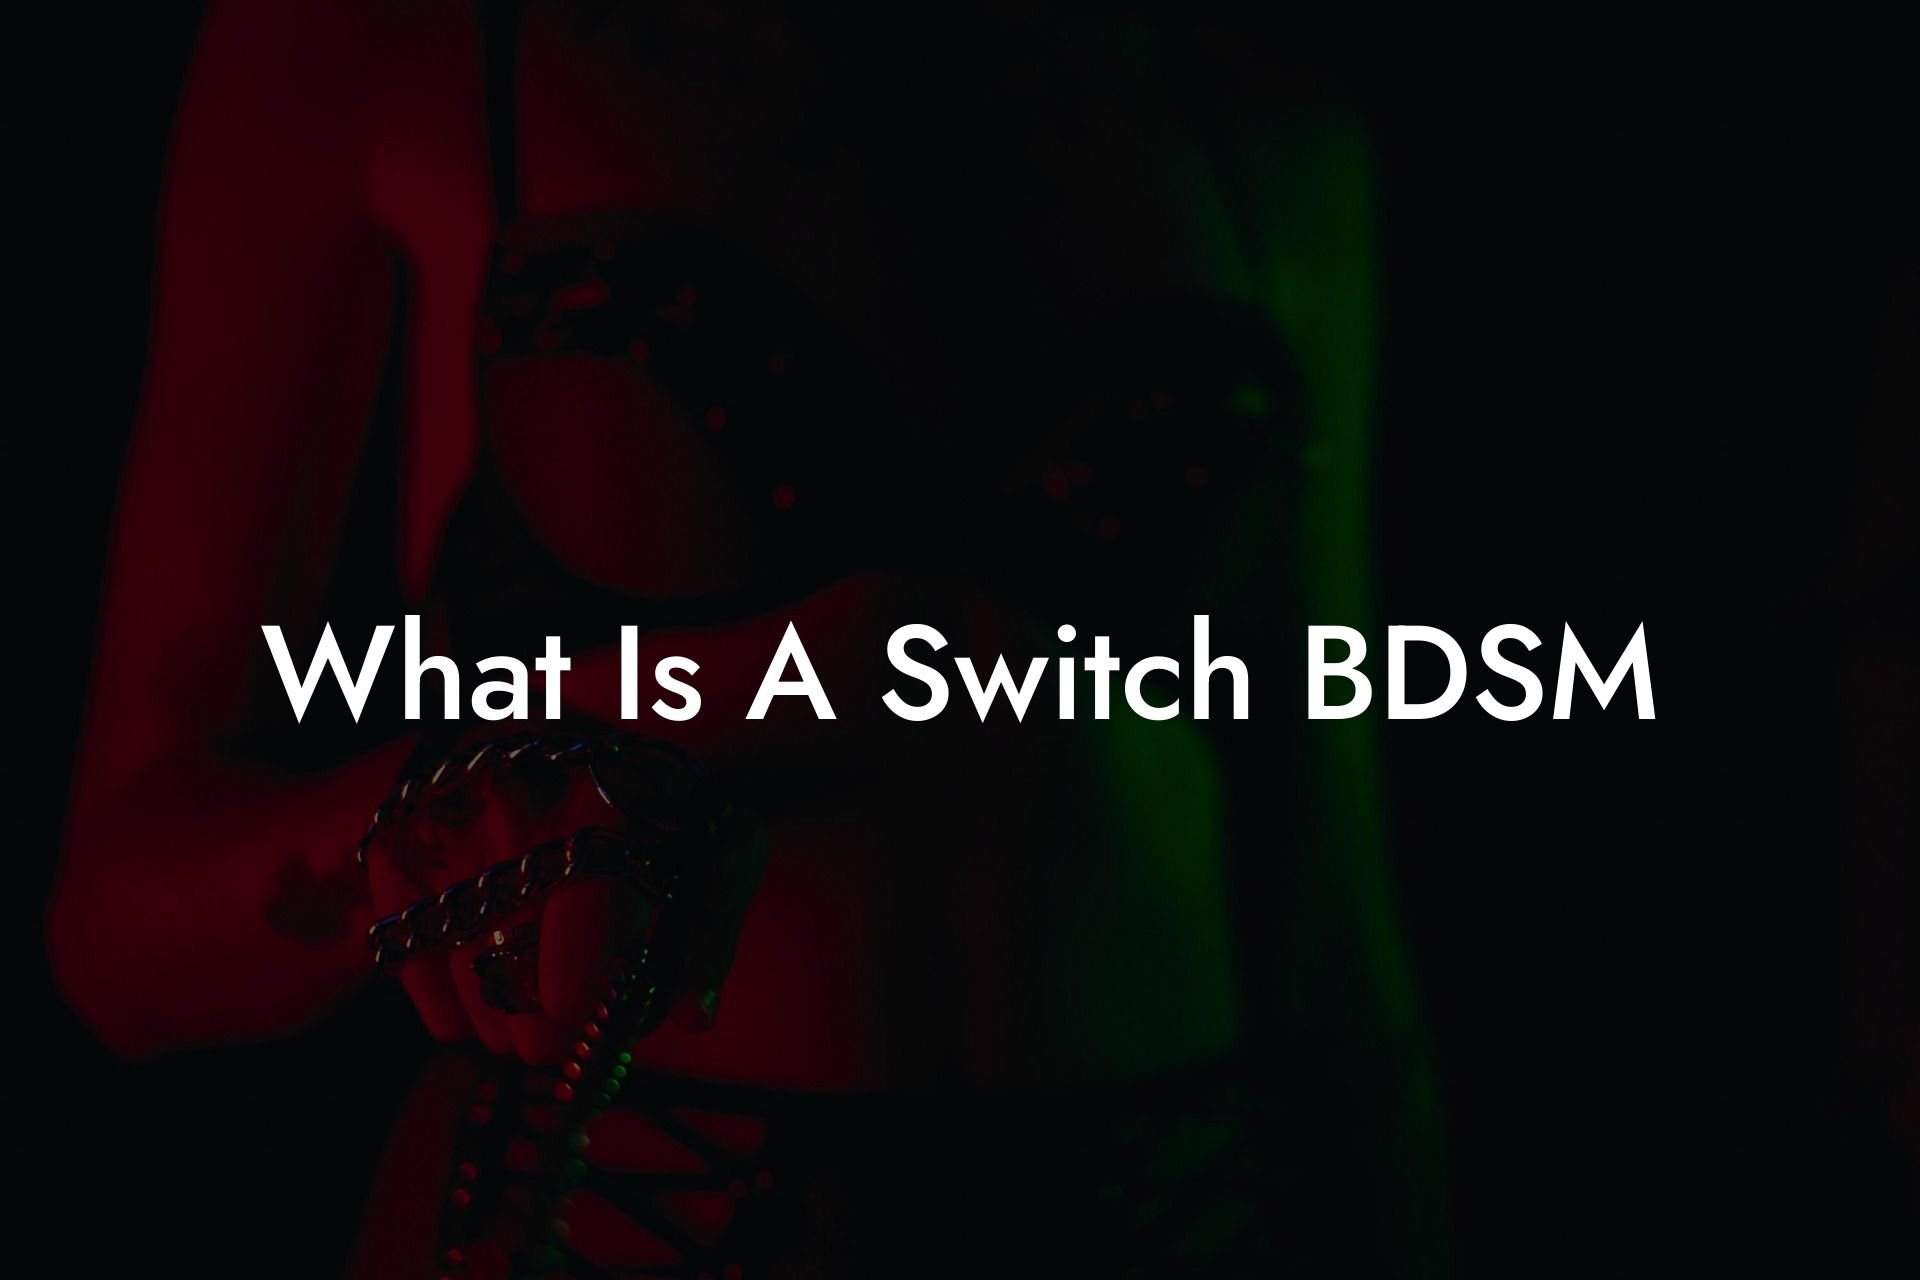 What Is A Switch BDSM